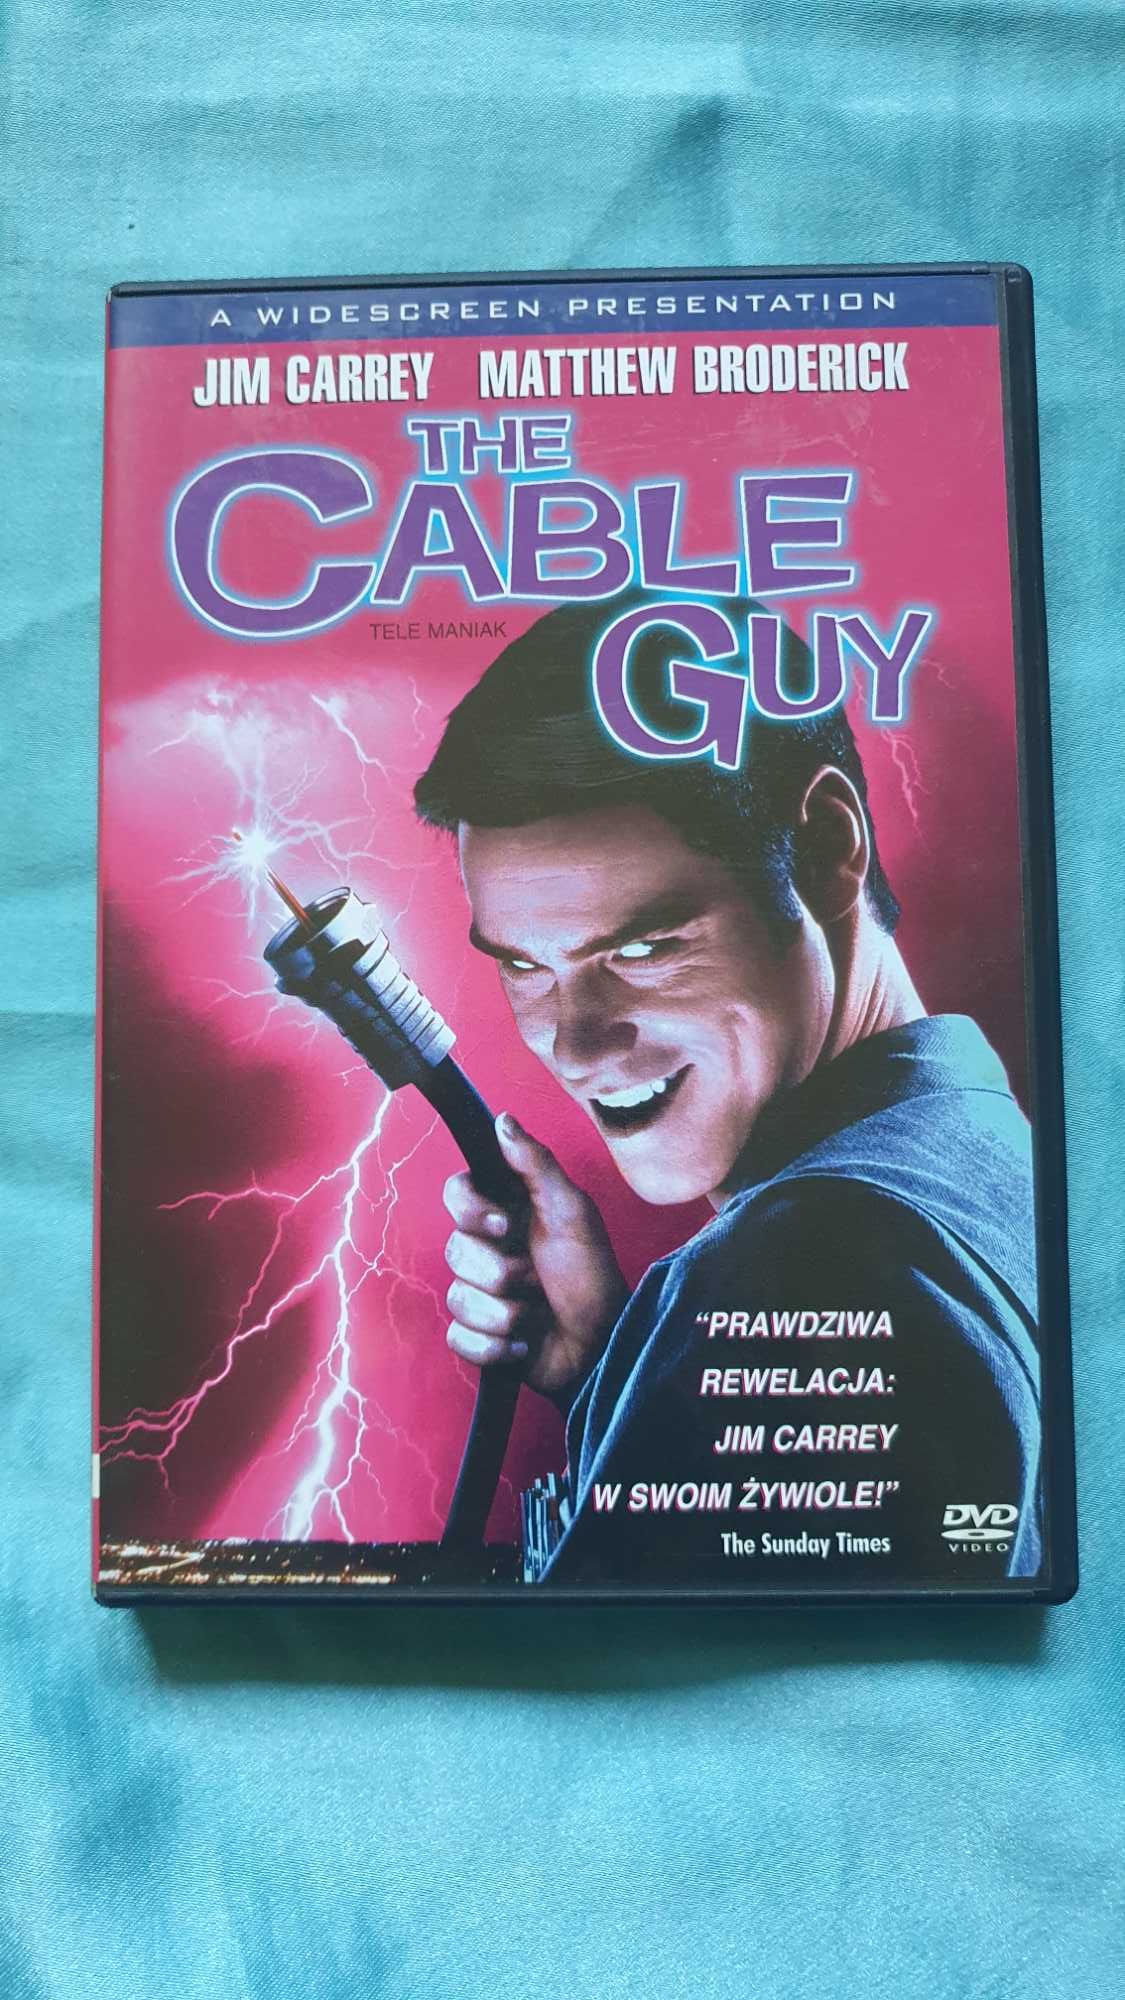 TELEMANIAK  (The Cable Guy)  DVD